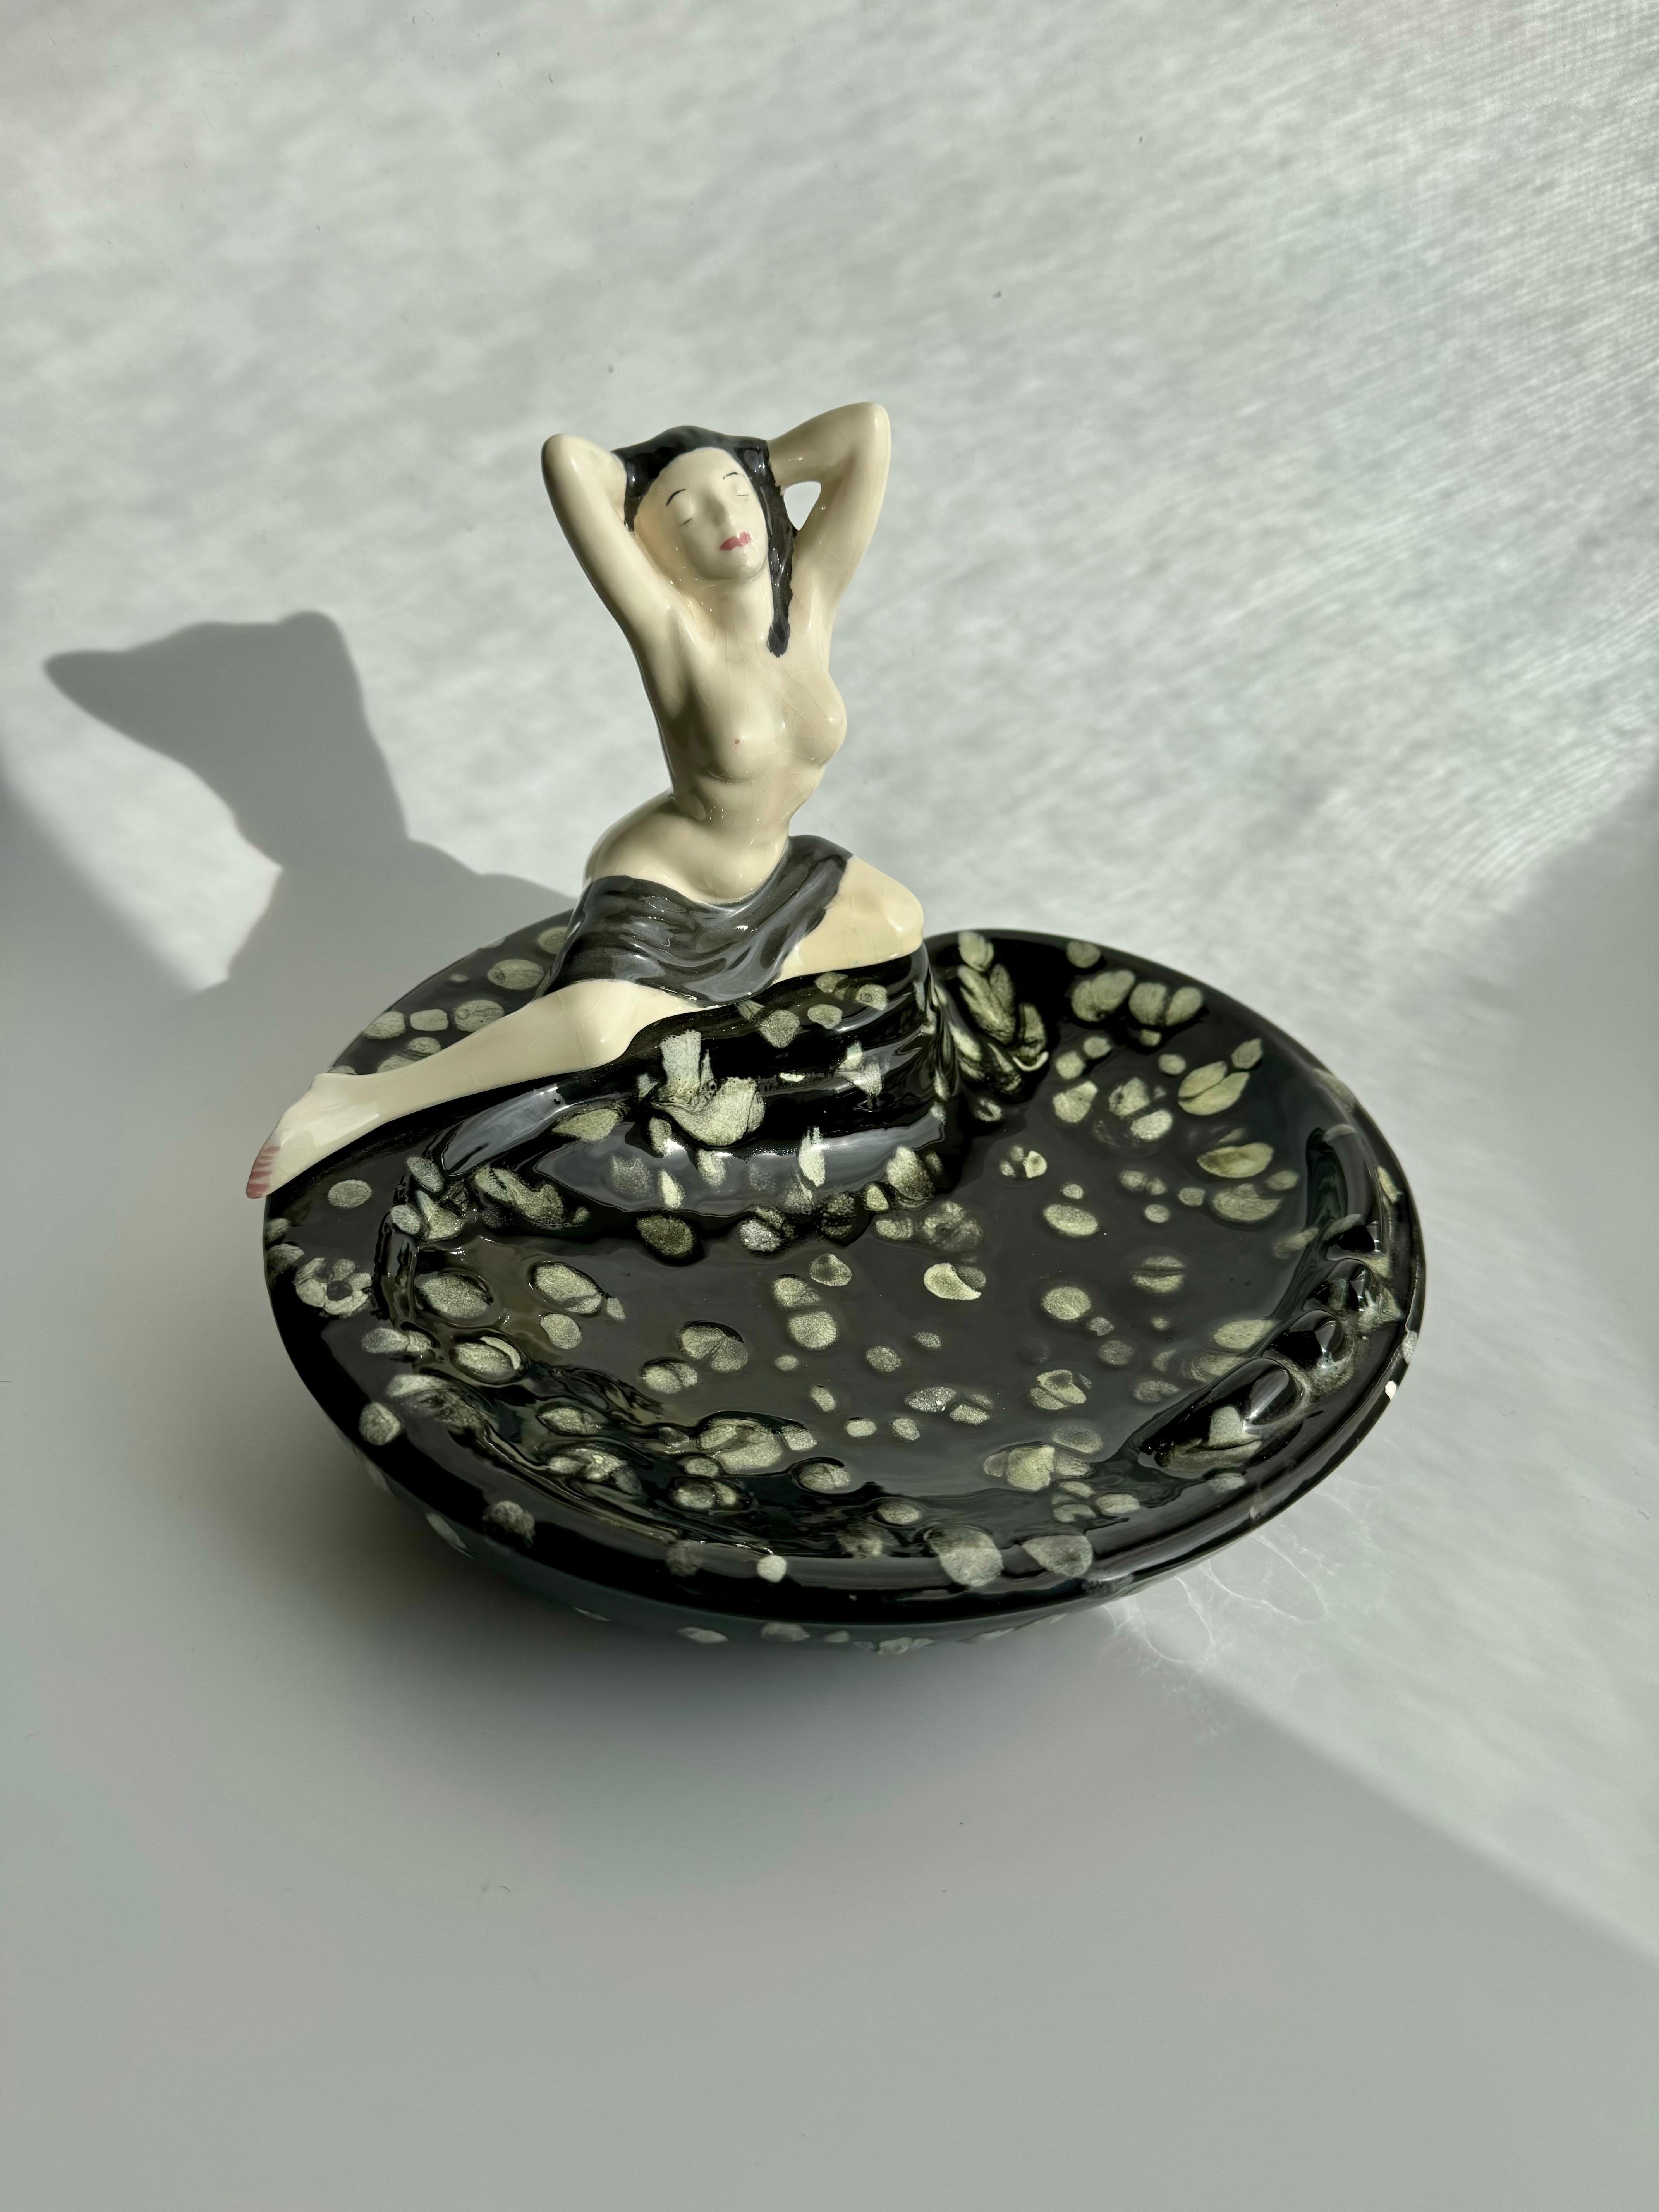 Stunning Mid Century Ashtray with a nude feminine body of a young women sitting on the edge of the bowl, this magnificent piece is very artistic and could be use in many ways, as a catch all bowl or as a soap dish in a Bathroom. It’s very unique and